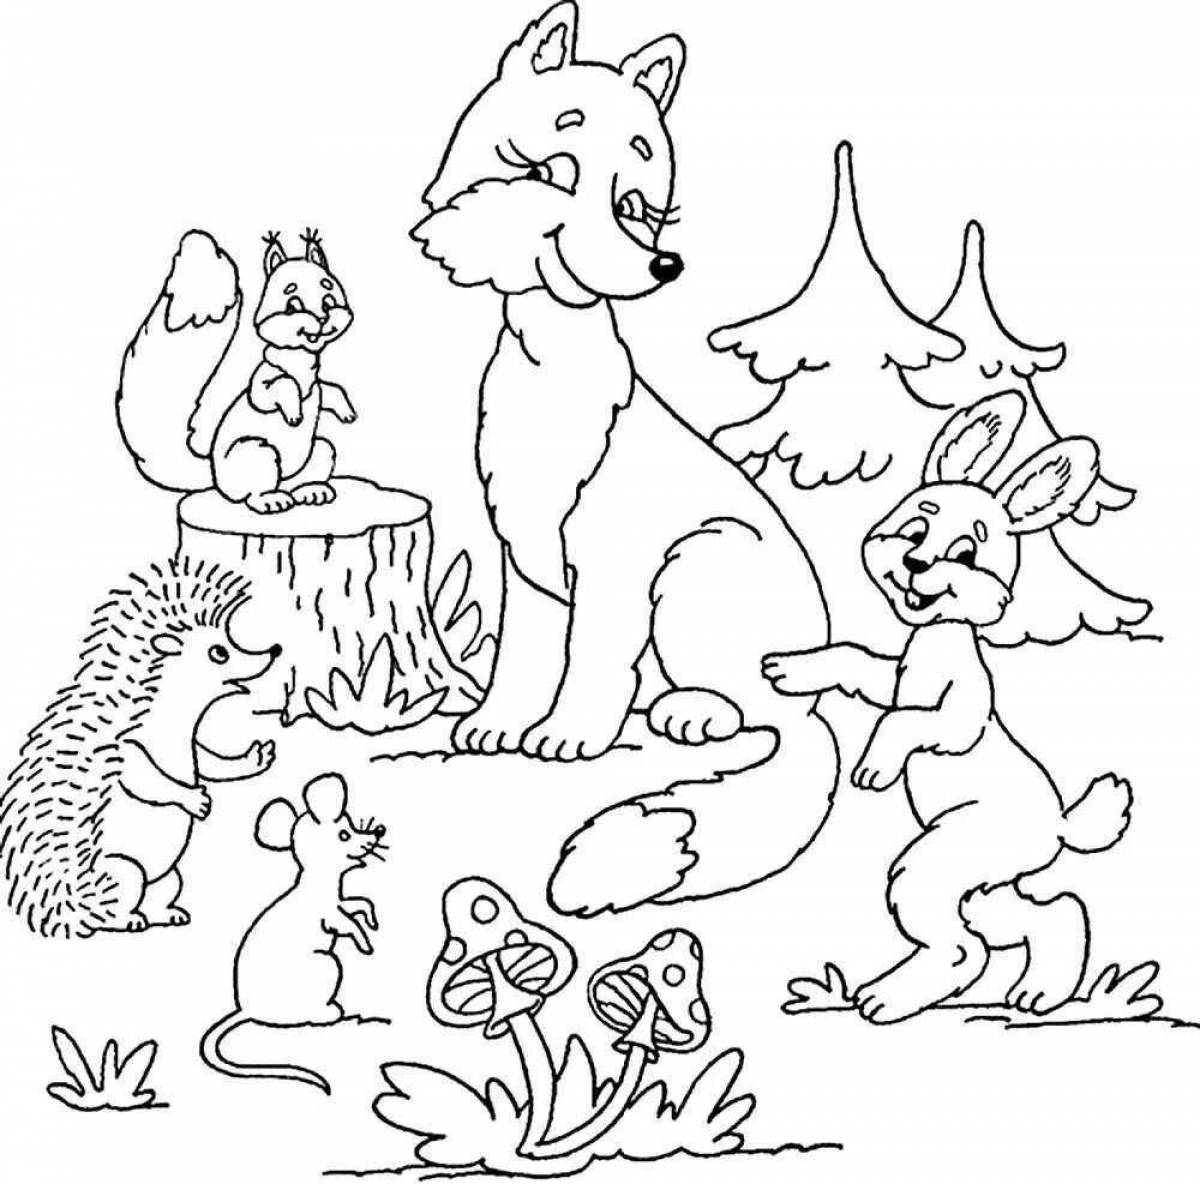 Adorable forest animal coloring book for 5-6 year olds